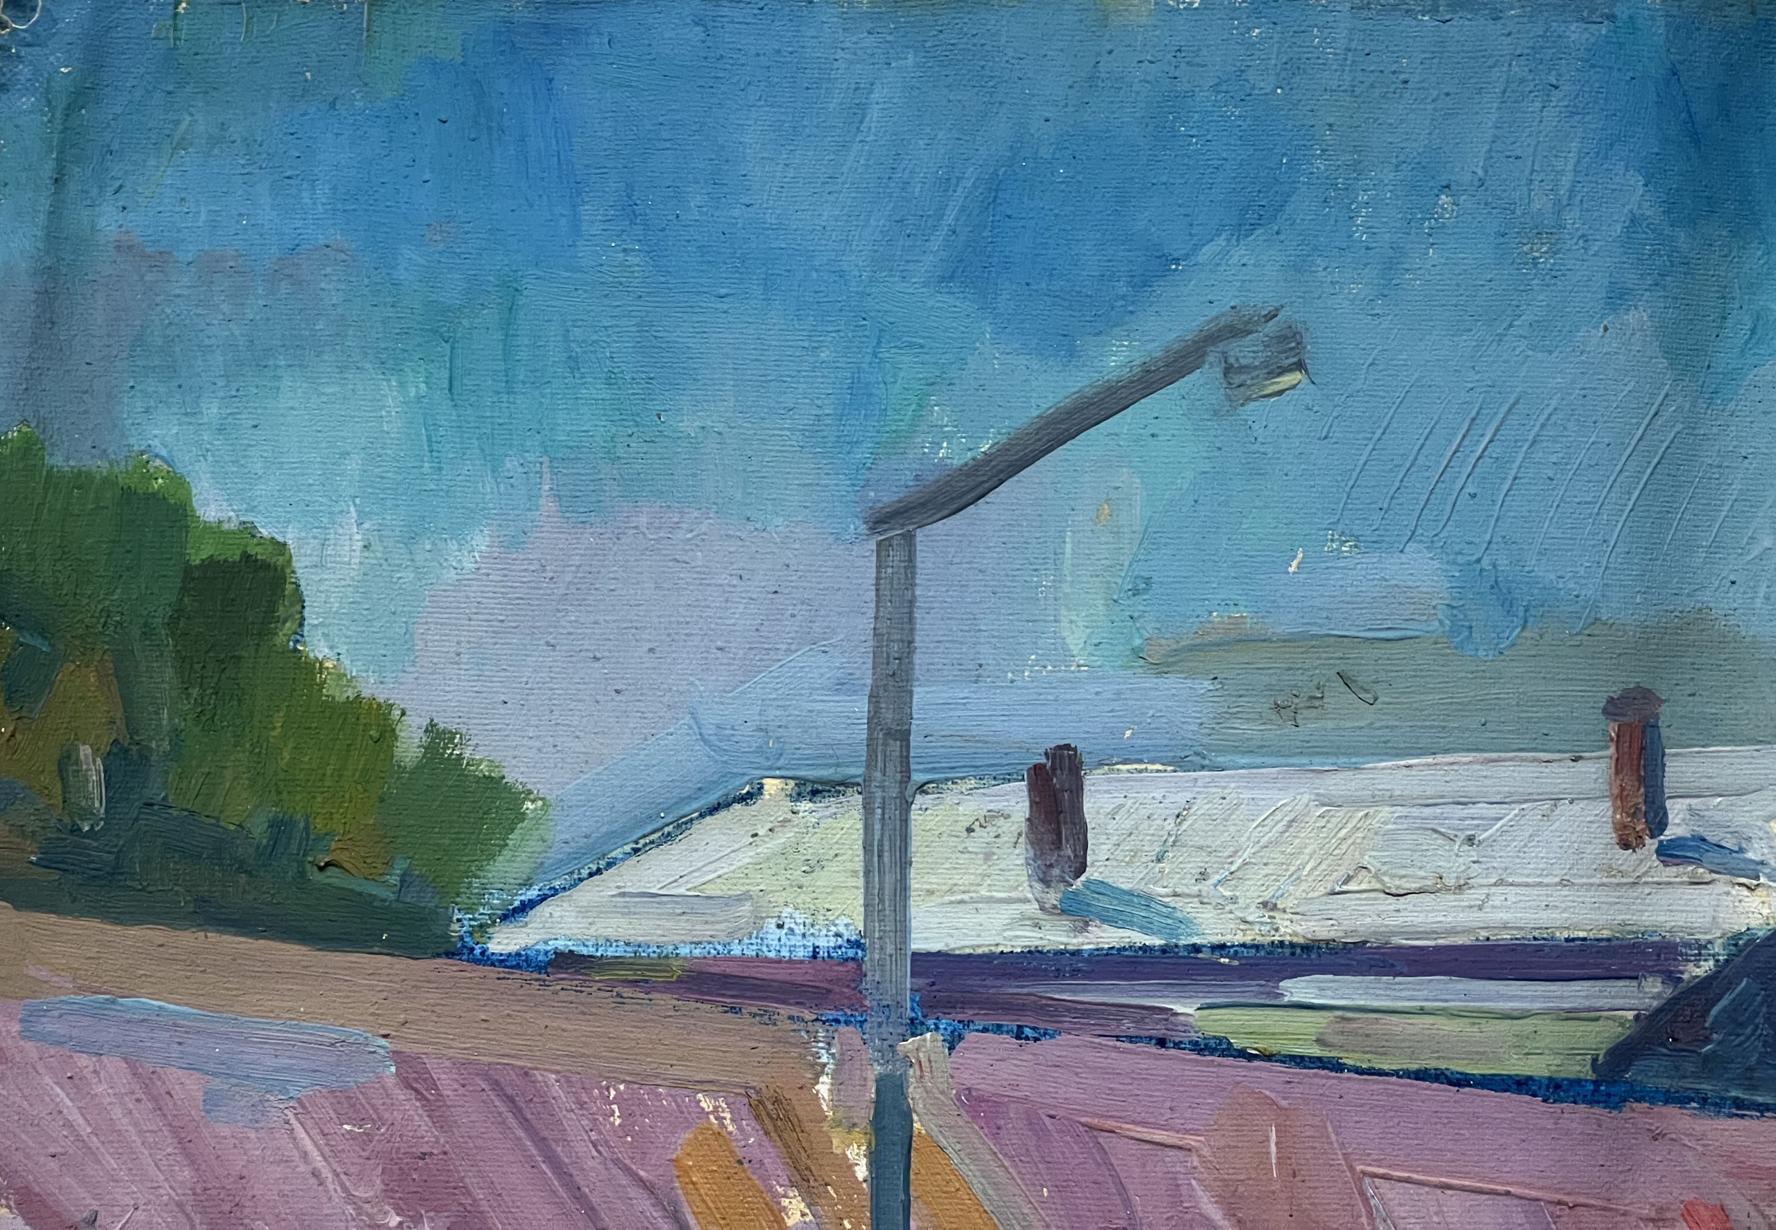 Peter Dobrev's oil painting presents an abstract interpretation of a bus stop